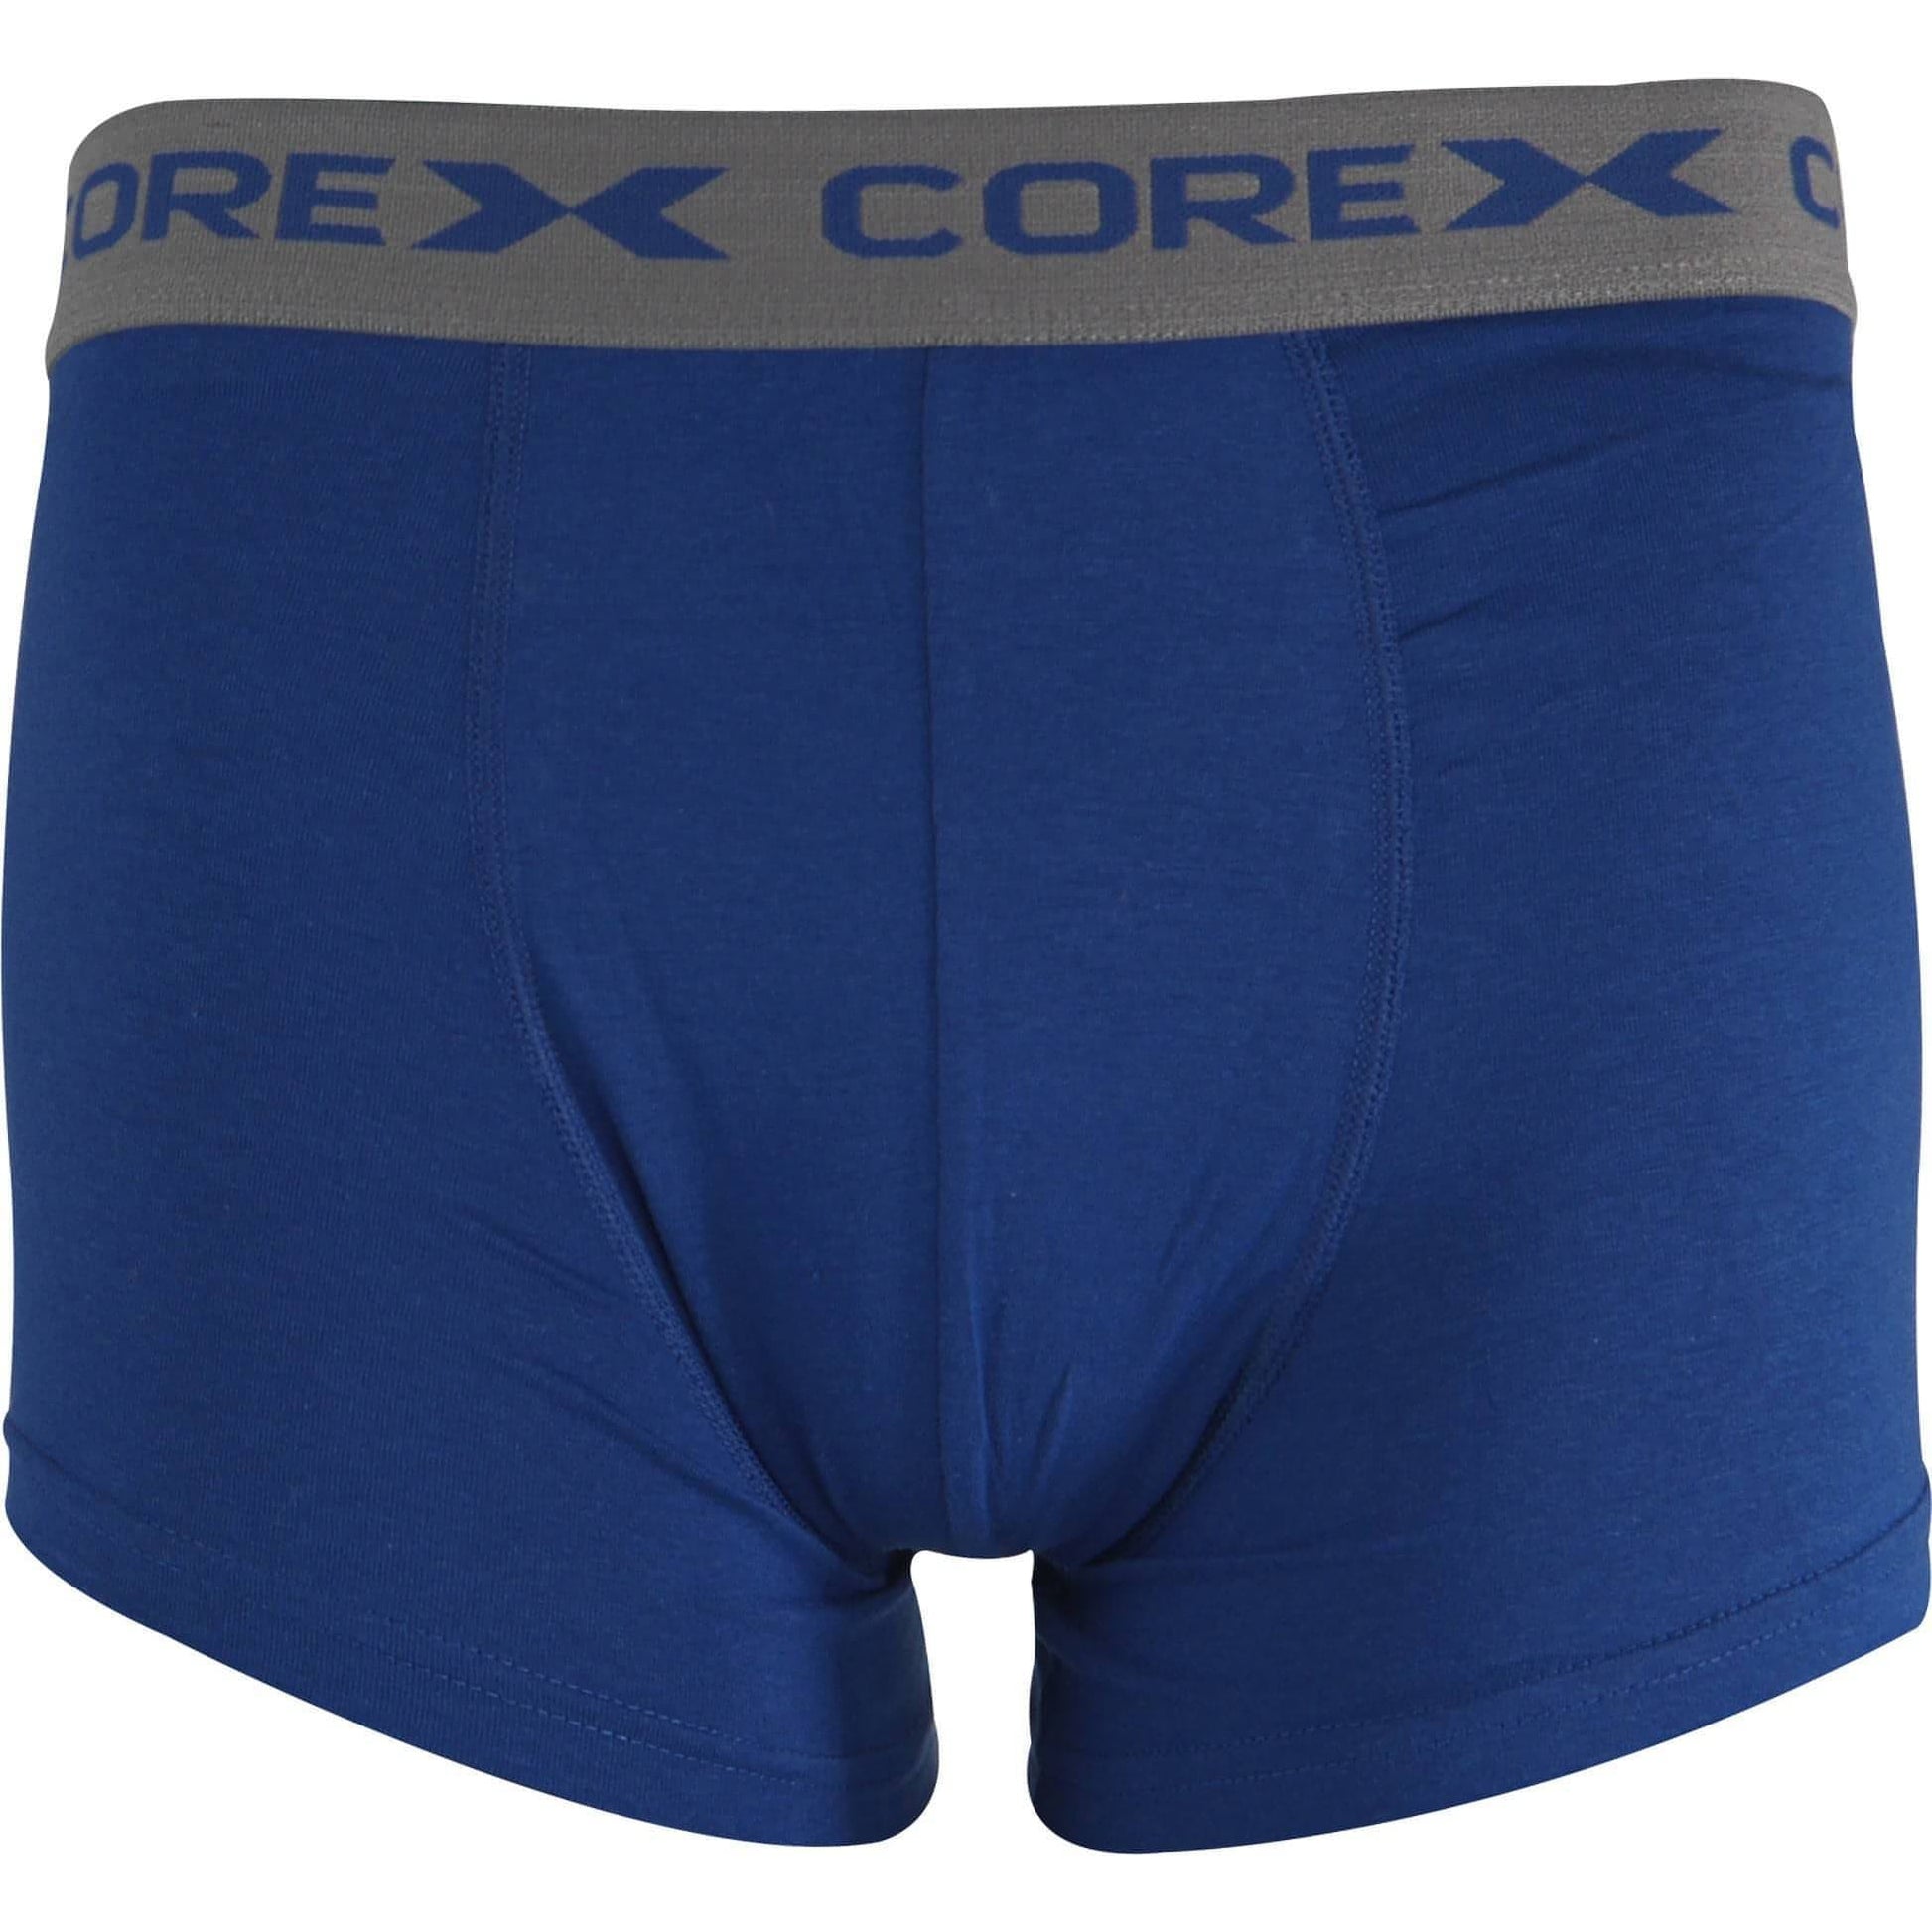 Corex Fitness Classic Pack Boxers 1P204911Wm Royalgrey Royal Front - Front View